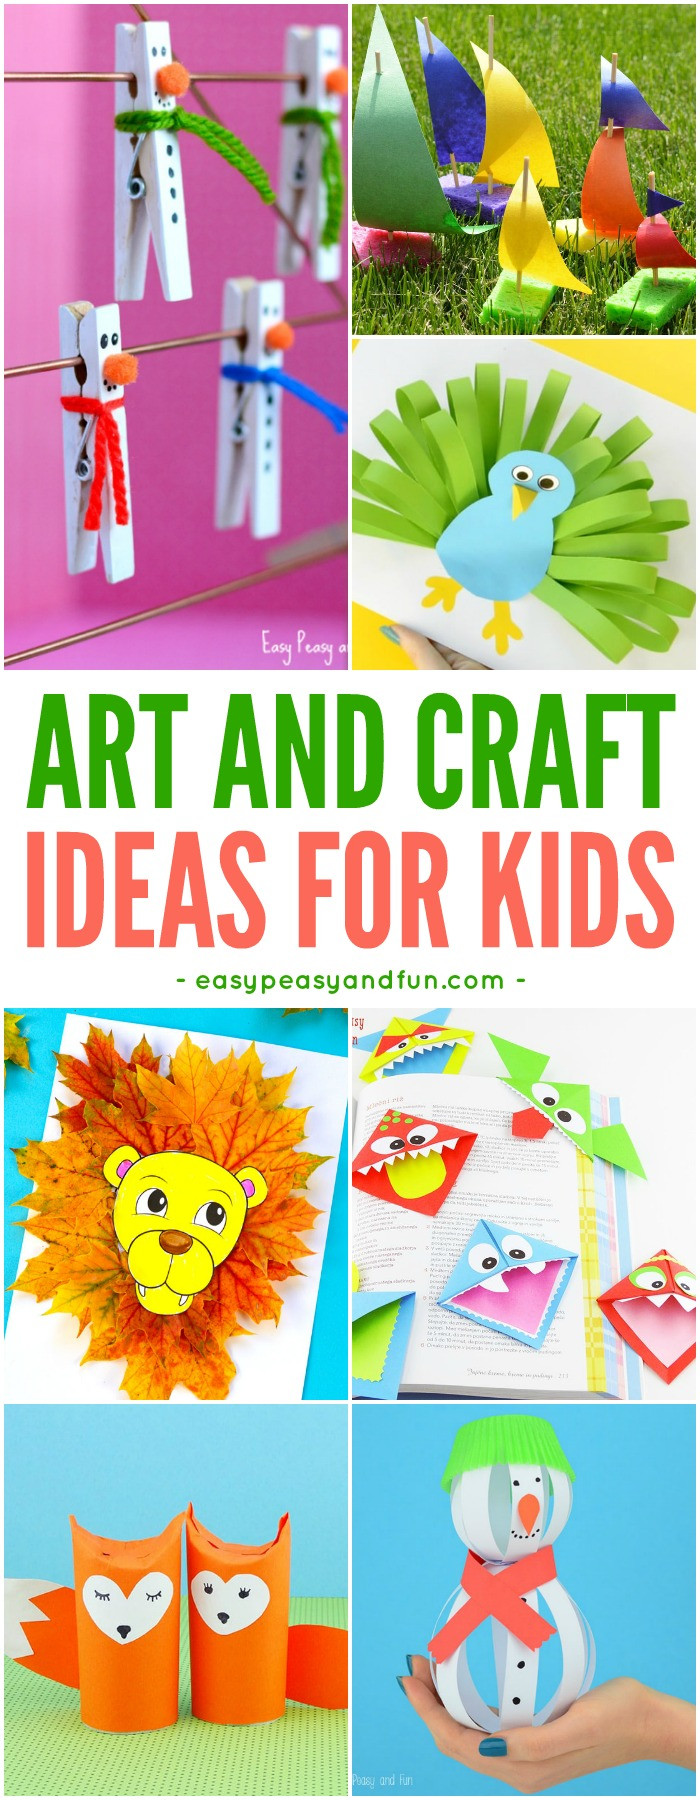 Toddlers Art And Craft Activities
 Crafts For Kids Tons of Art and Craft Ideas for Kids to